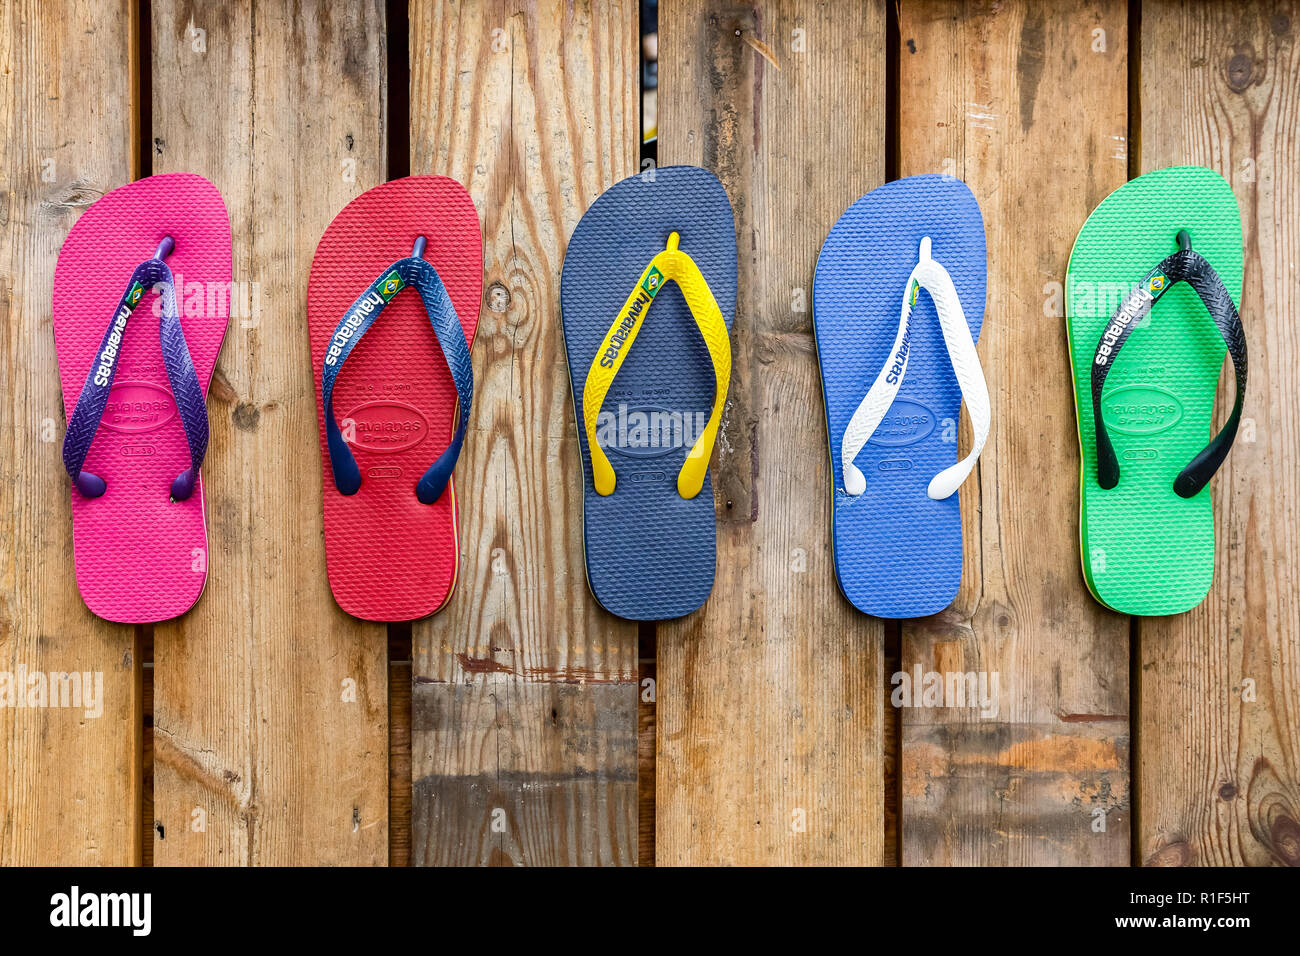 Havaianas Flip Flops High Resolution Stock Photography and Images - Alamy